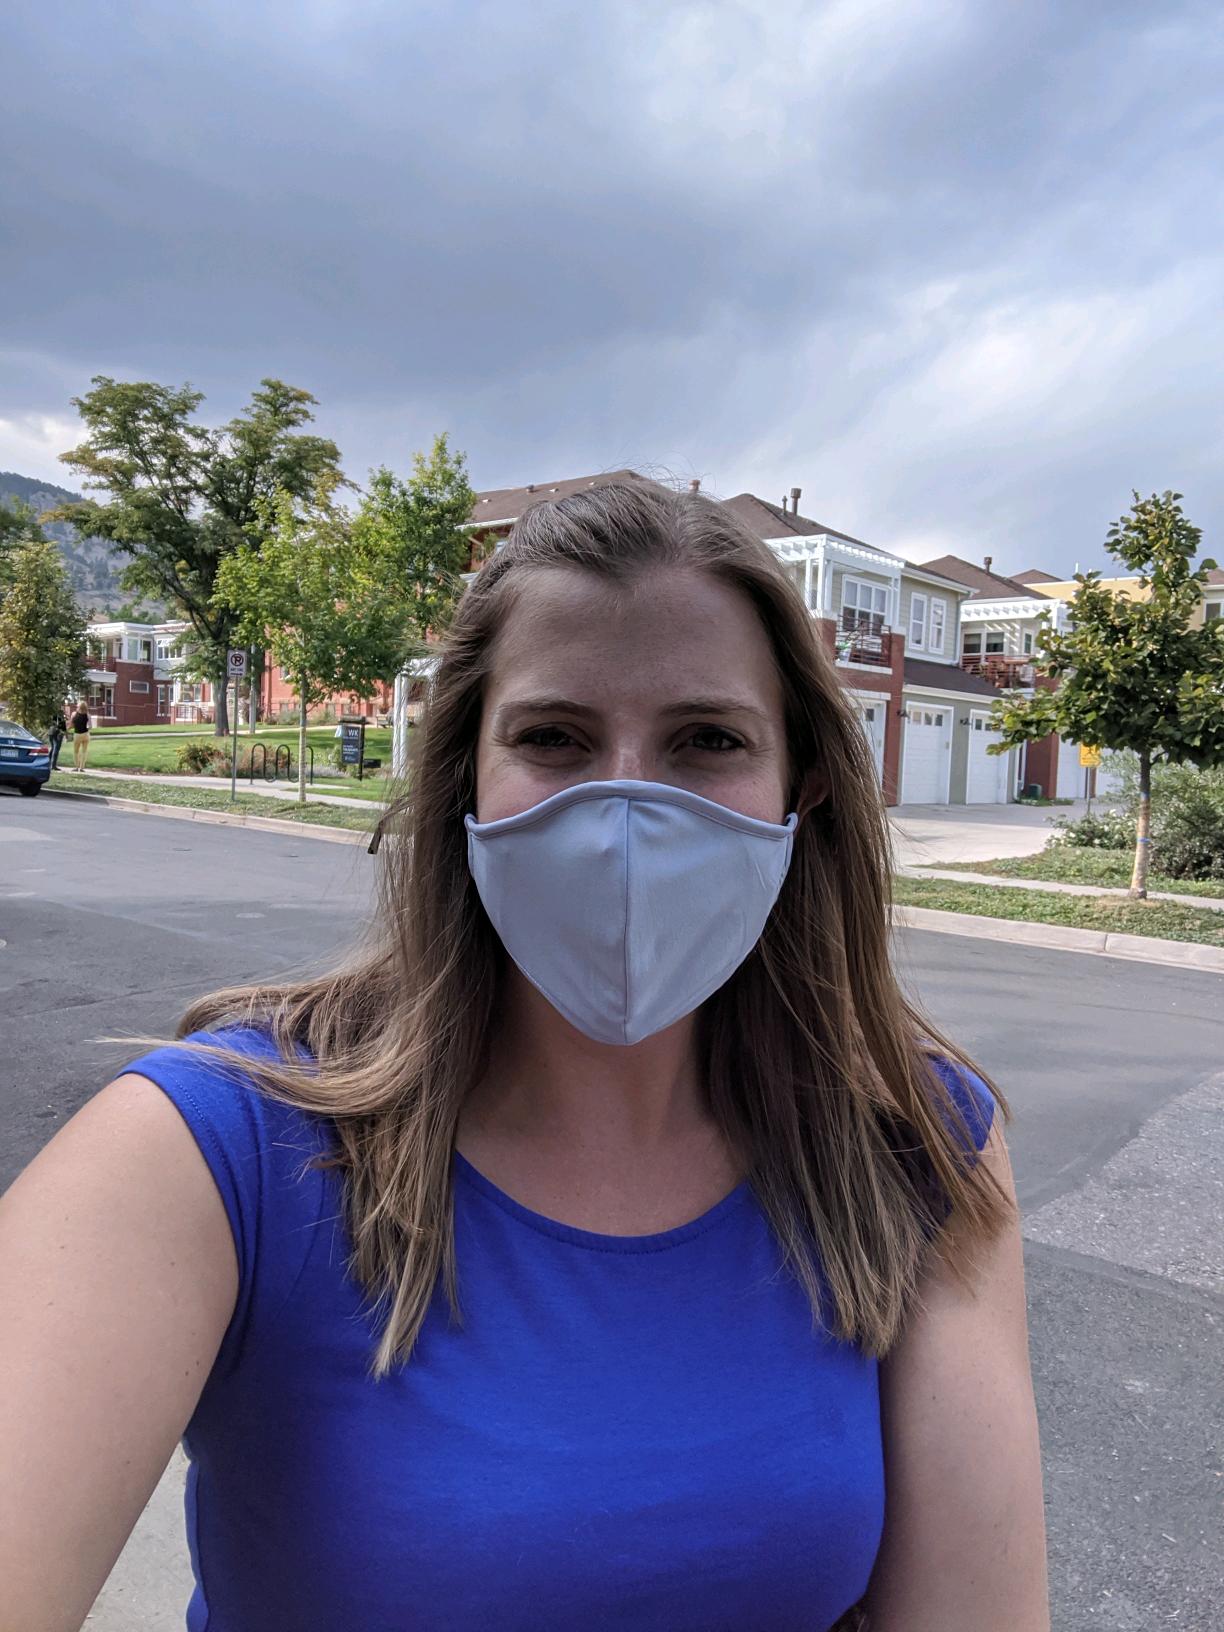 Like the home improvement industry, real estate has adjusted their practices to slow the spread of the coronavirus. Even with her mask on, you can still tell that our realtor, Laura, is smiling!